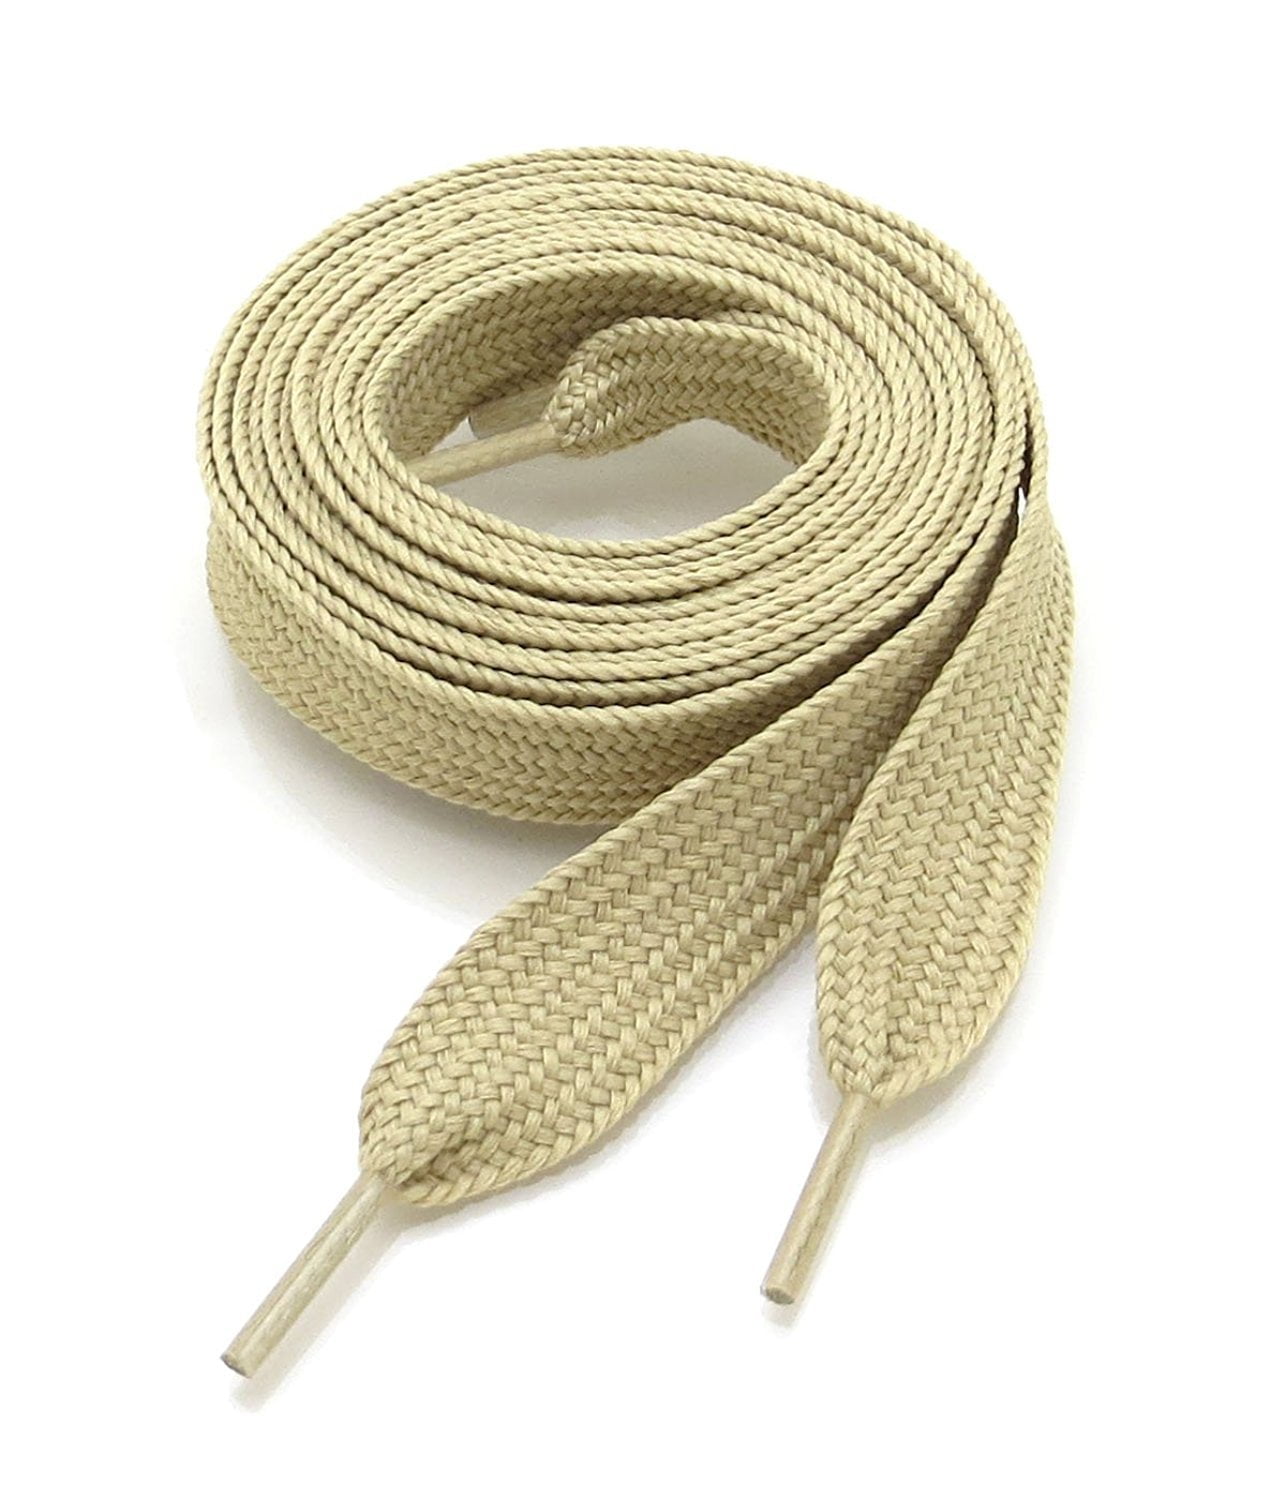 Flat Shoe Laces for Sneakers and Shoes - Wide Shoelaces Flat Shoelaces 1/4 Wide Shoes Lace 2 Pair